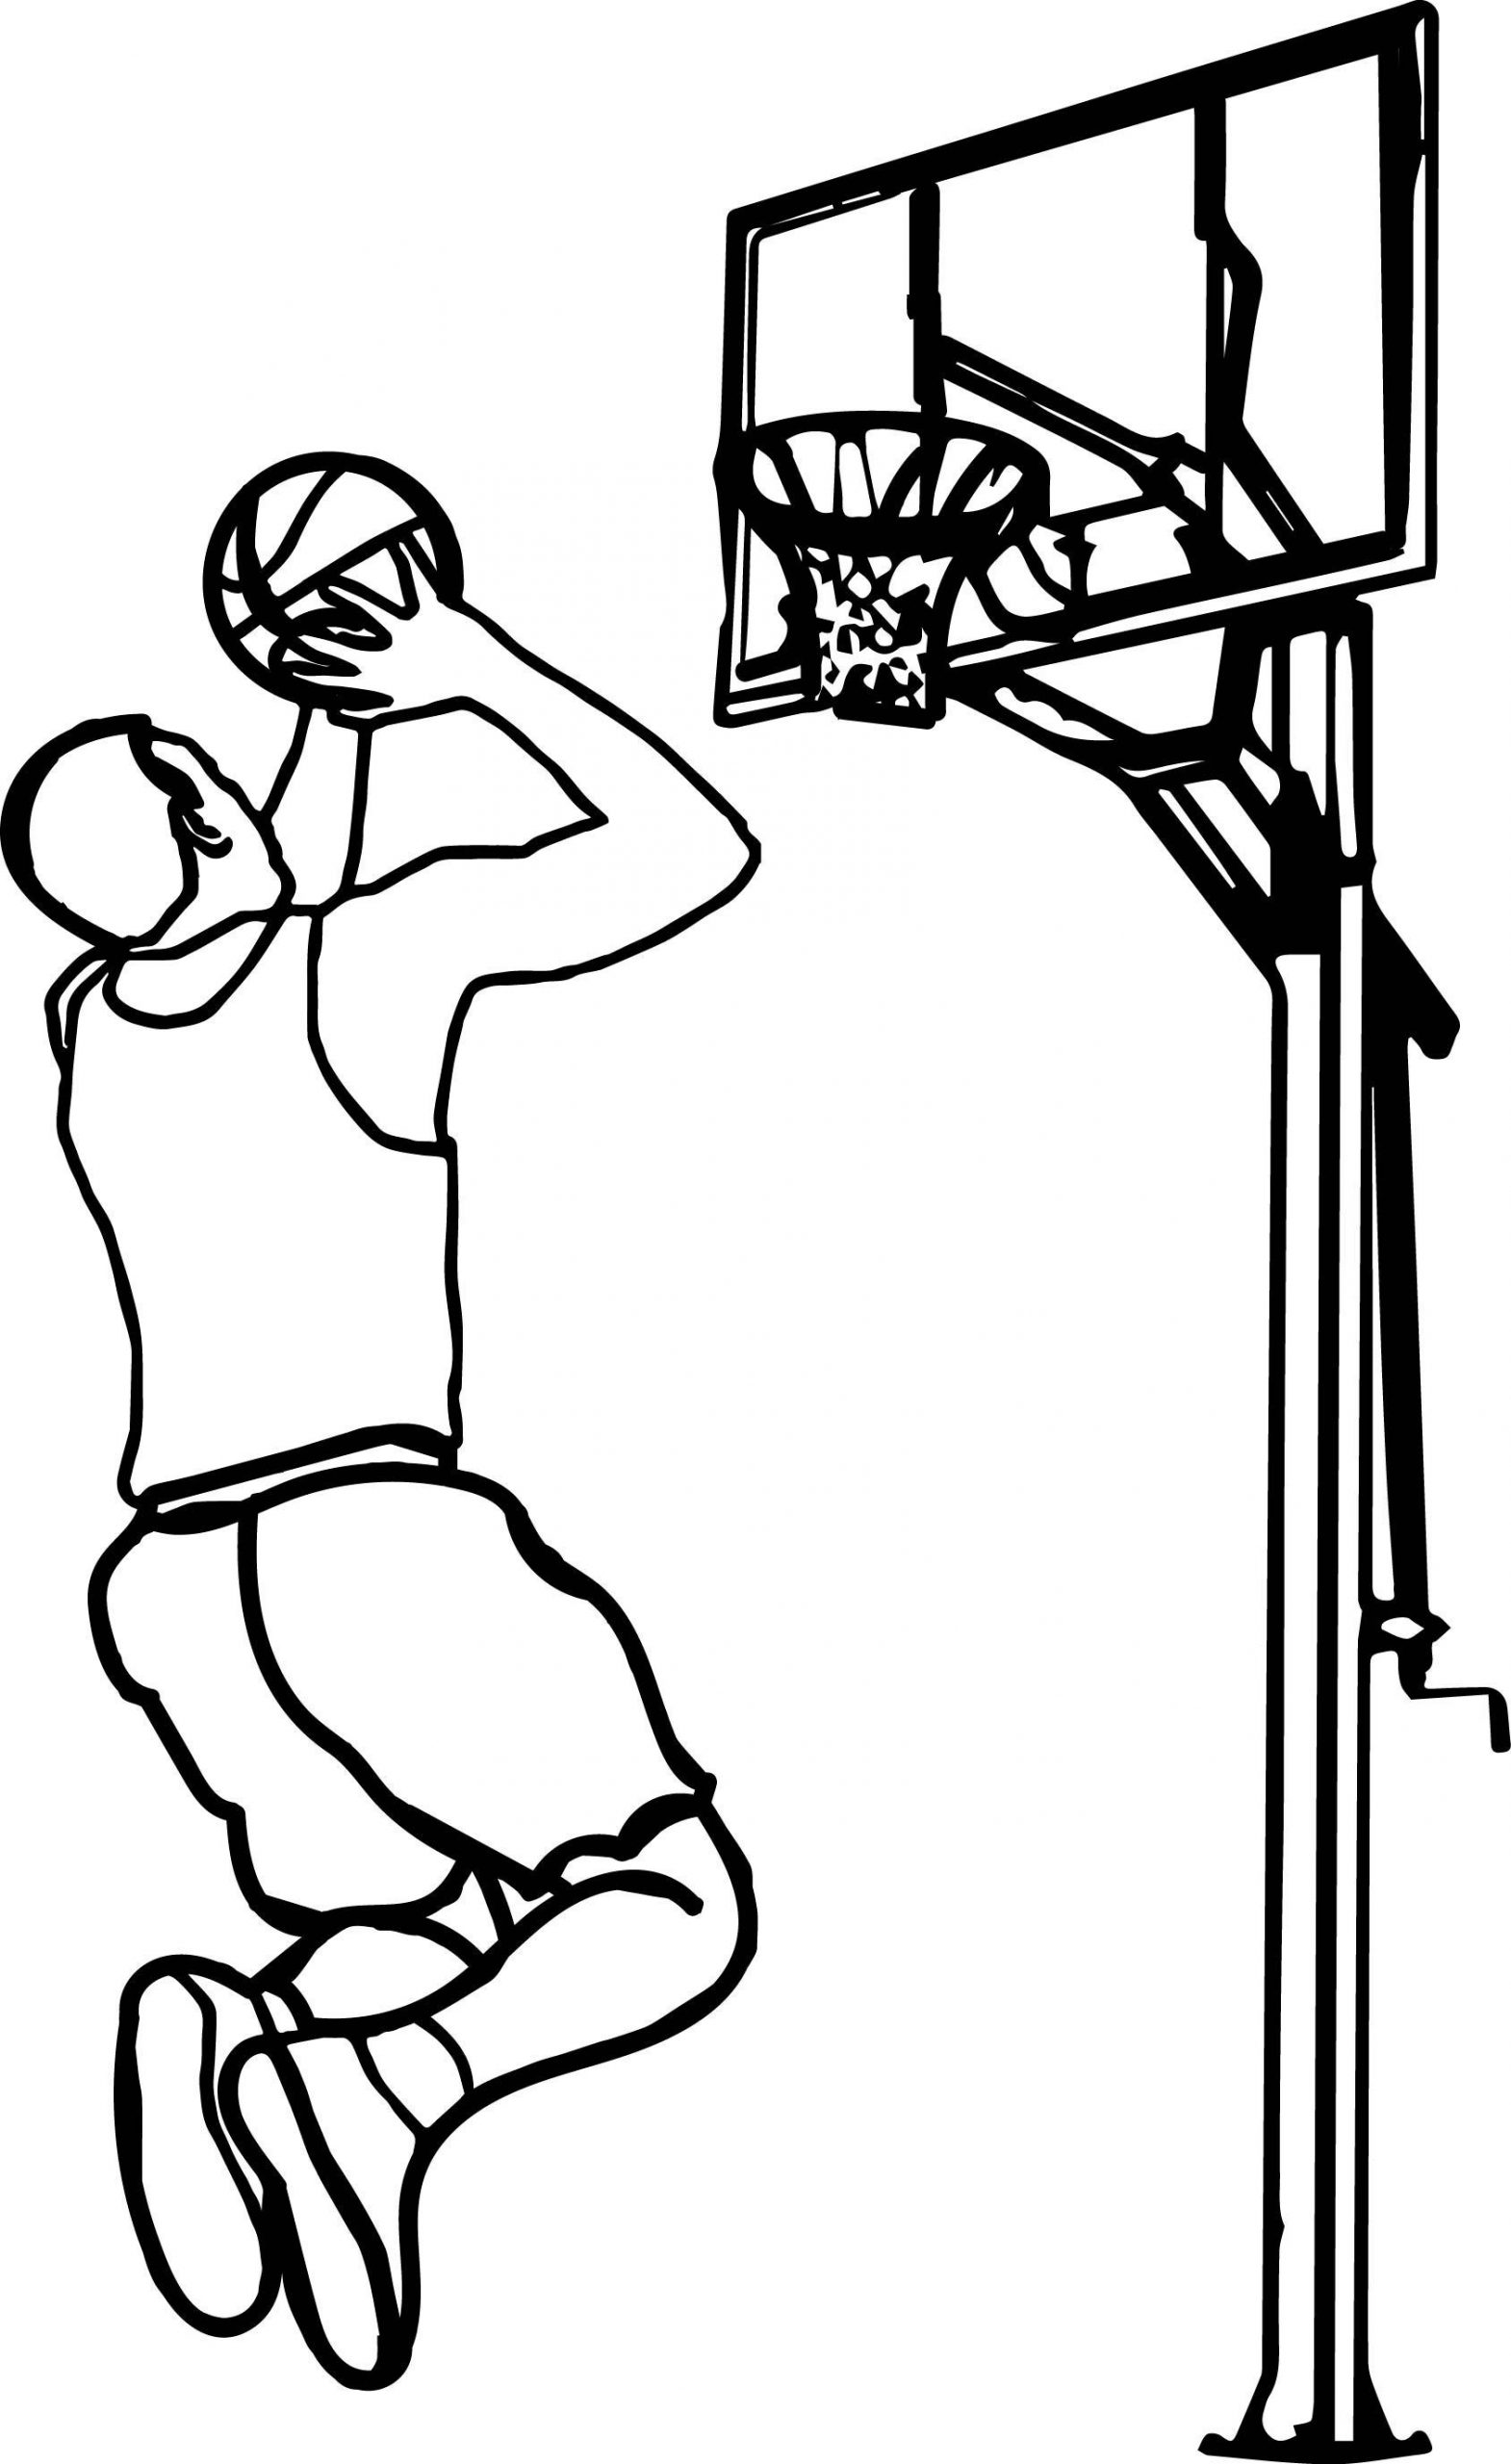 Basketball player on the court coloring book to print and online